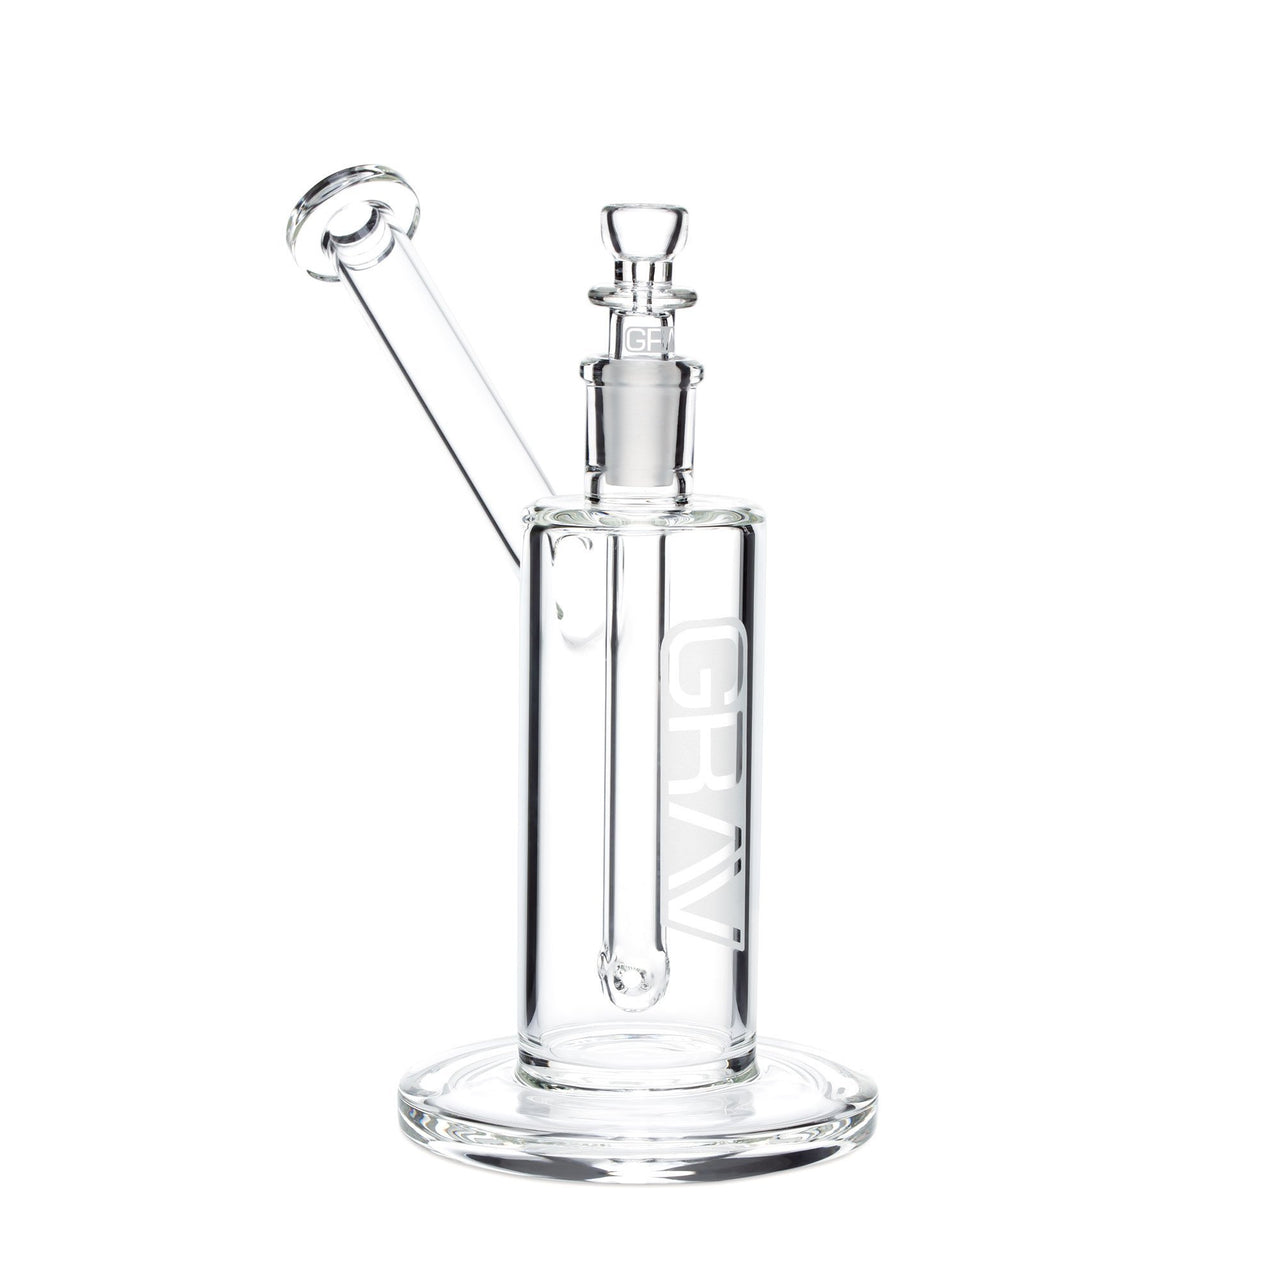 Home Blown Glass Road Straw Air-Cooled Dry Rig / $ 24.99 at 420 Science